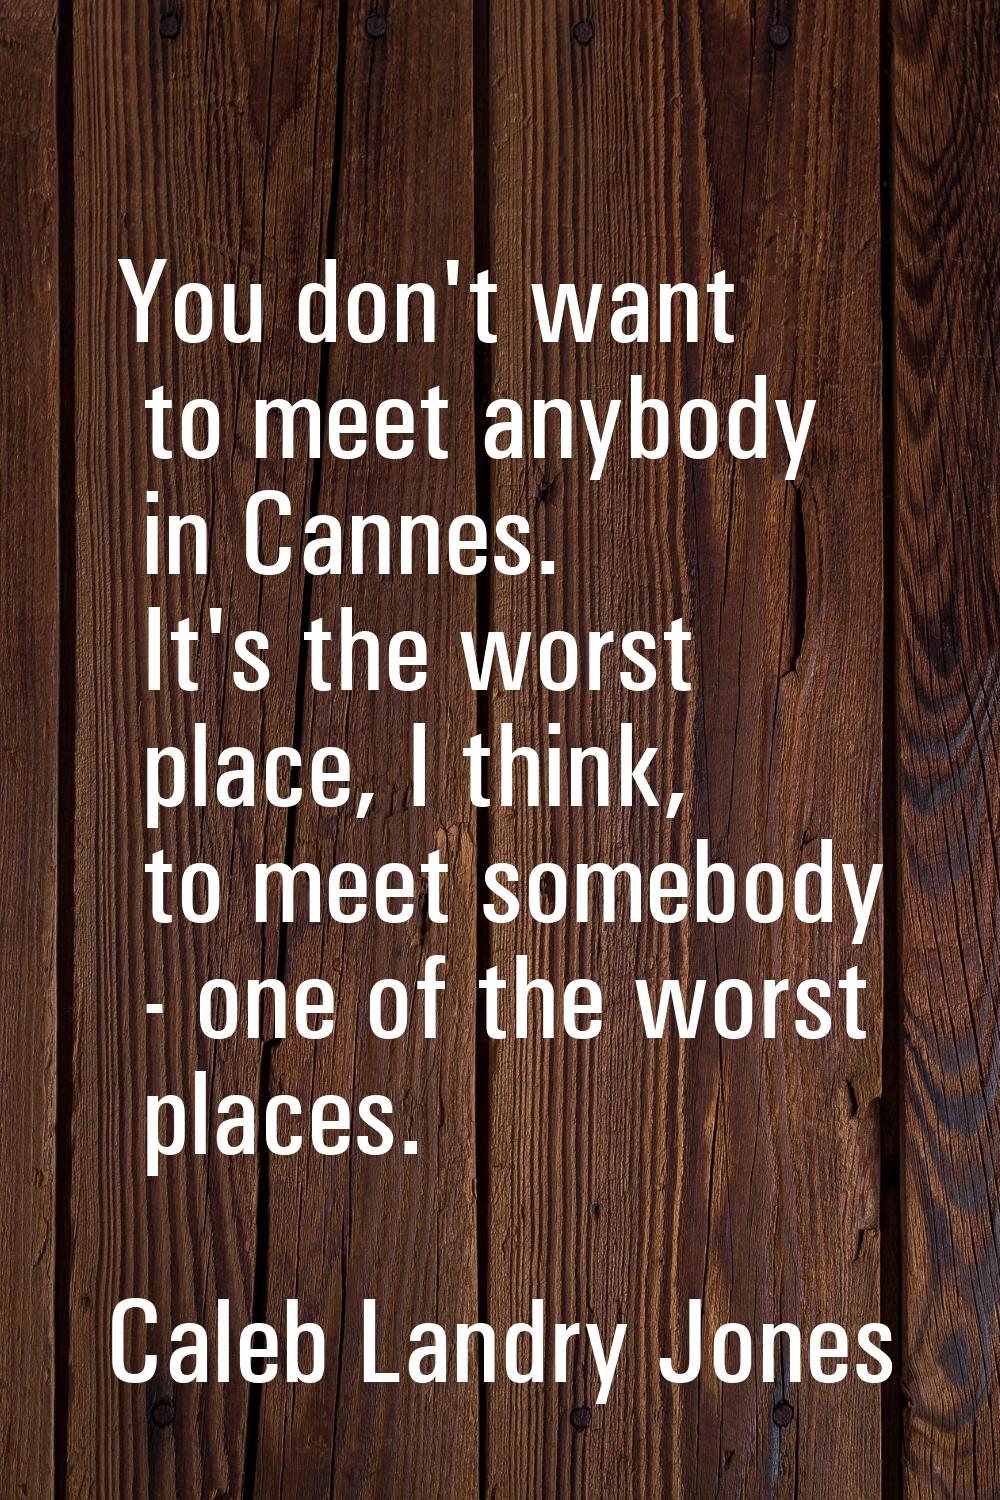 You don't want to meet anybody in Cannes. It's the worst place, I think, to meet somebody - one of 